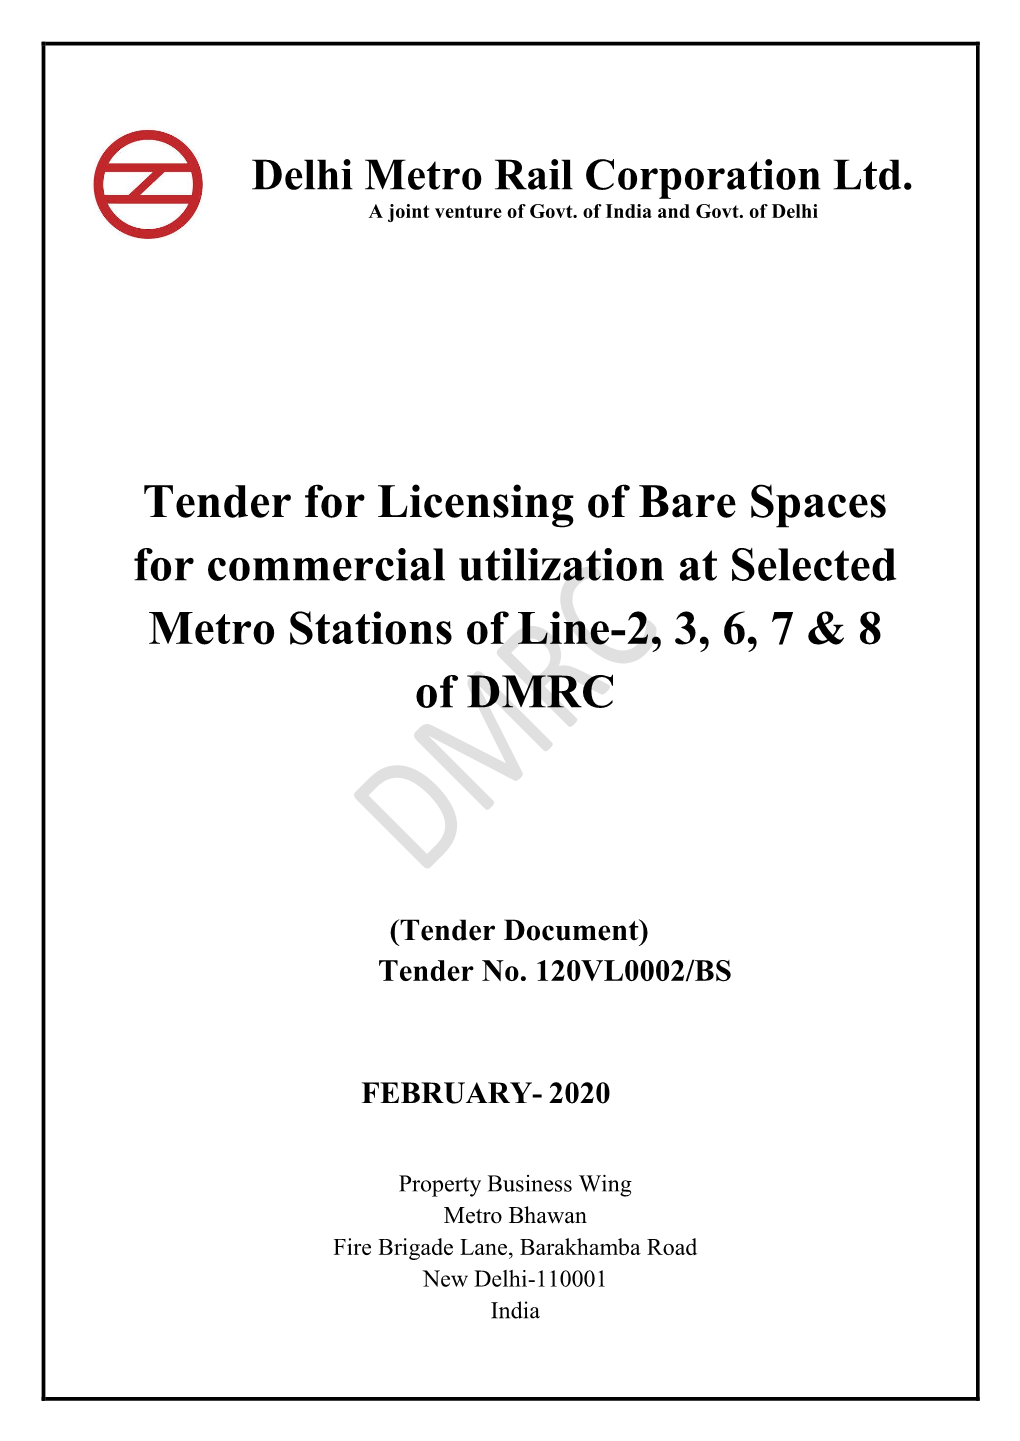 Tender for Licensing of Bare Spaces for Commercial Utilization at Selected Metro Stations of Line-2, 3, 6, 7 & 8 of DMRC